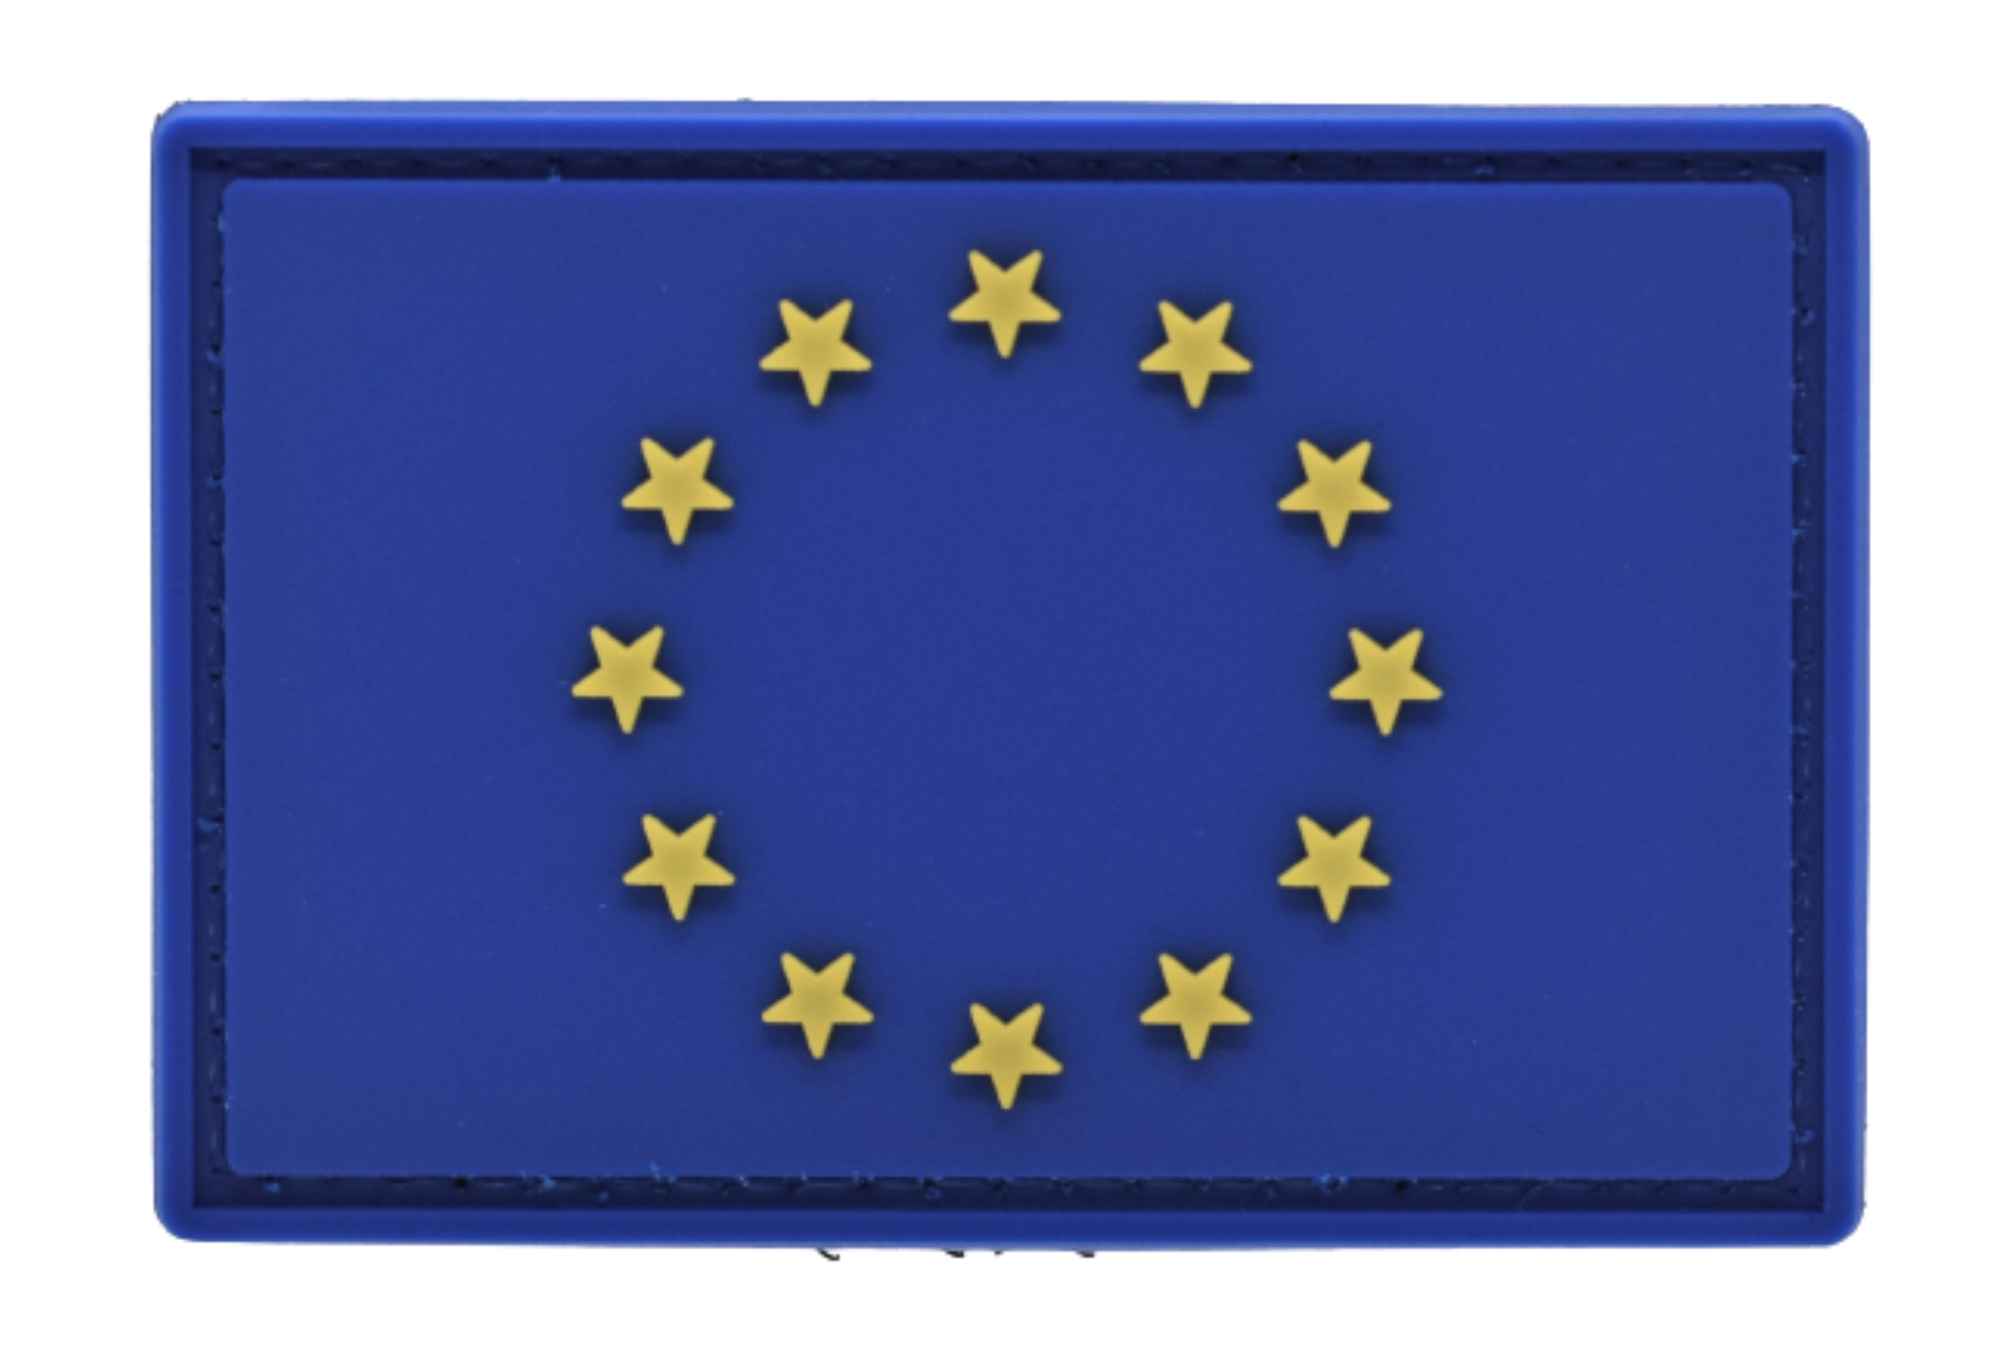 European flags patches